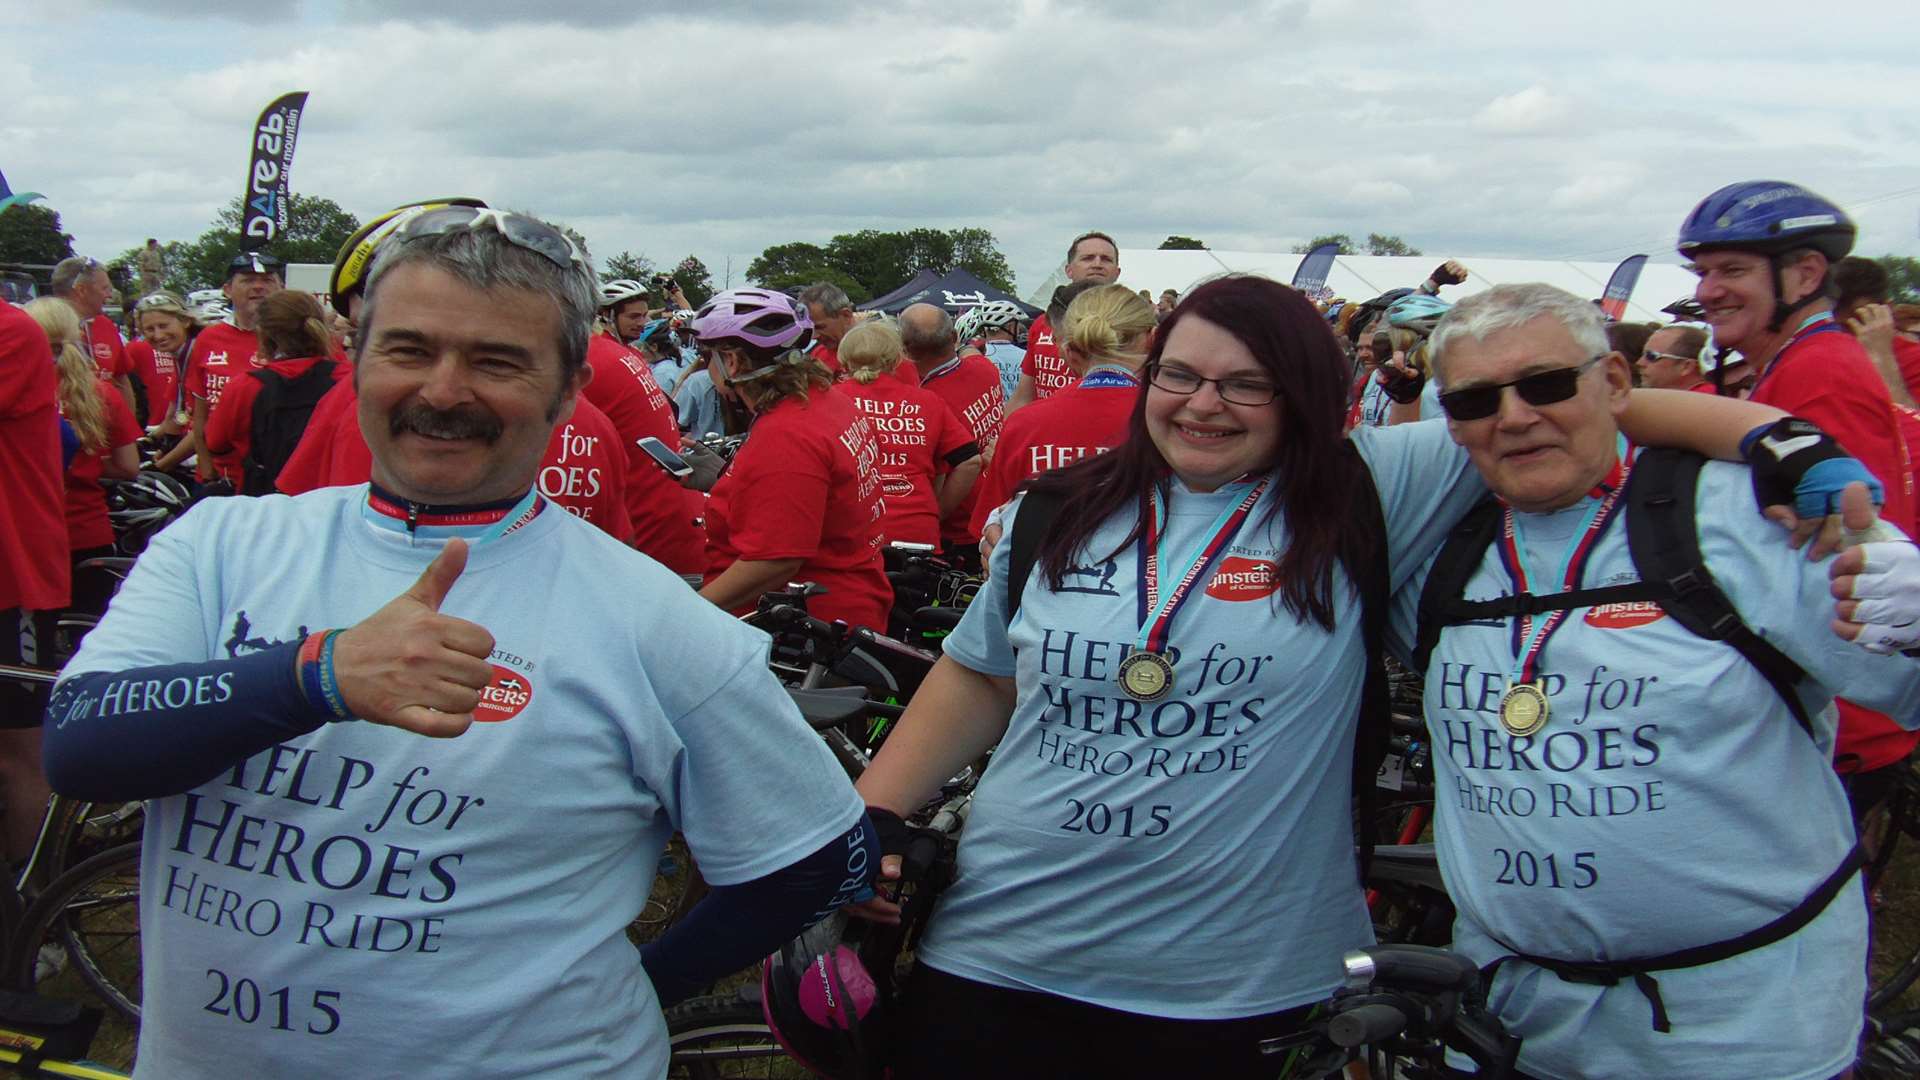 Cyclists David, Katie and Geoff Drury at the Help for heroes charity ride